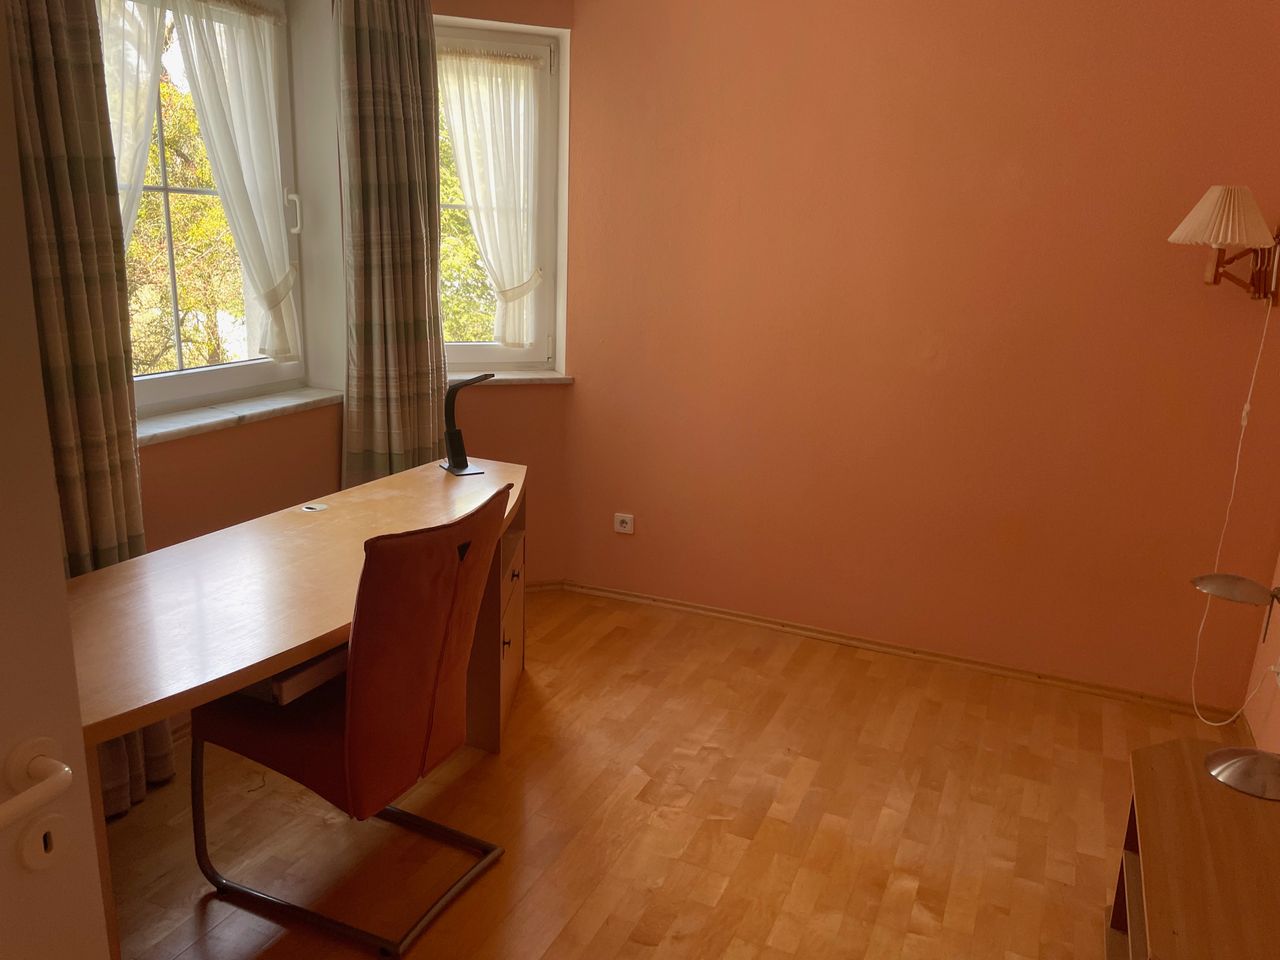 Partly furnished 3.5-room apartment with balcony (south) and EBK in Munich